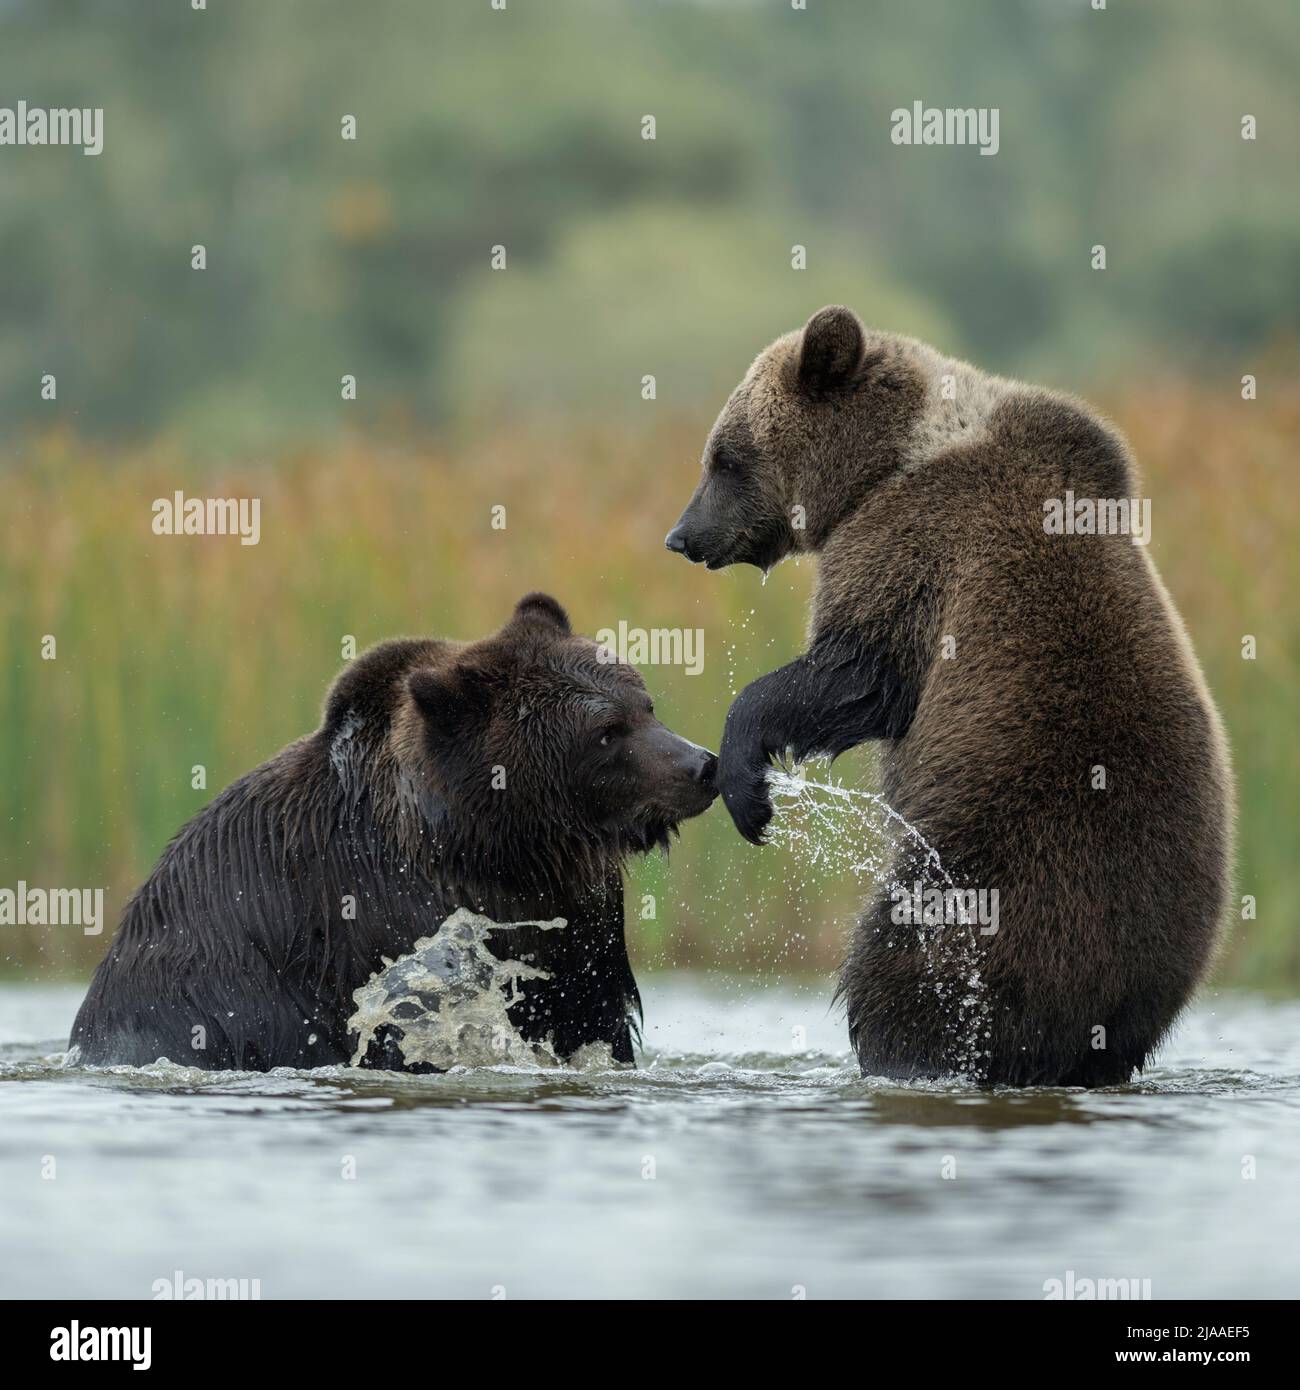 Brown Bears / Braunbaeren ( Ursus arctos ) fighting, struggling, playful fight, standing on hind legs in the shallow water of a lake, Europe. Stock Photo